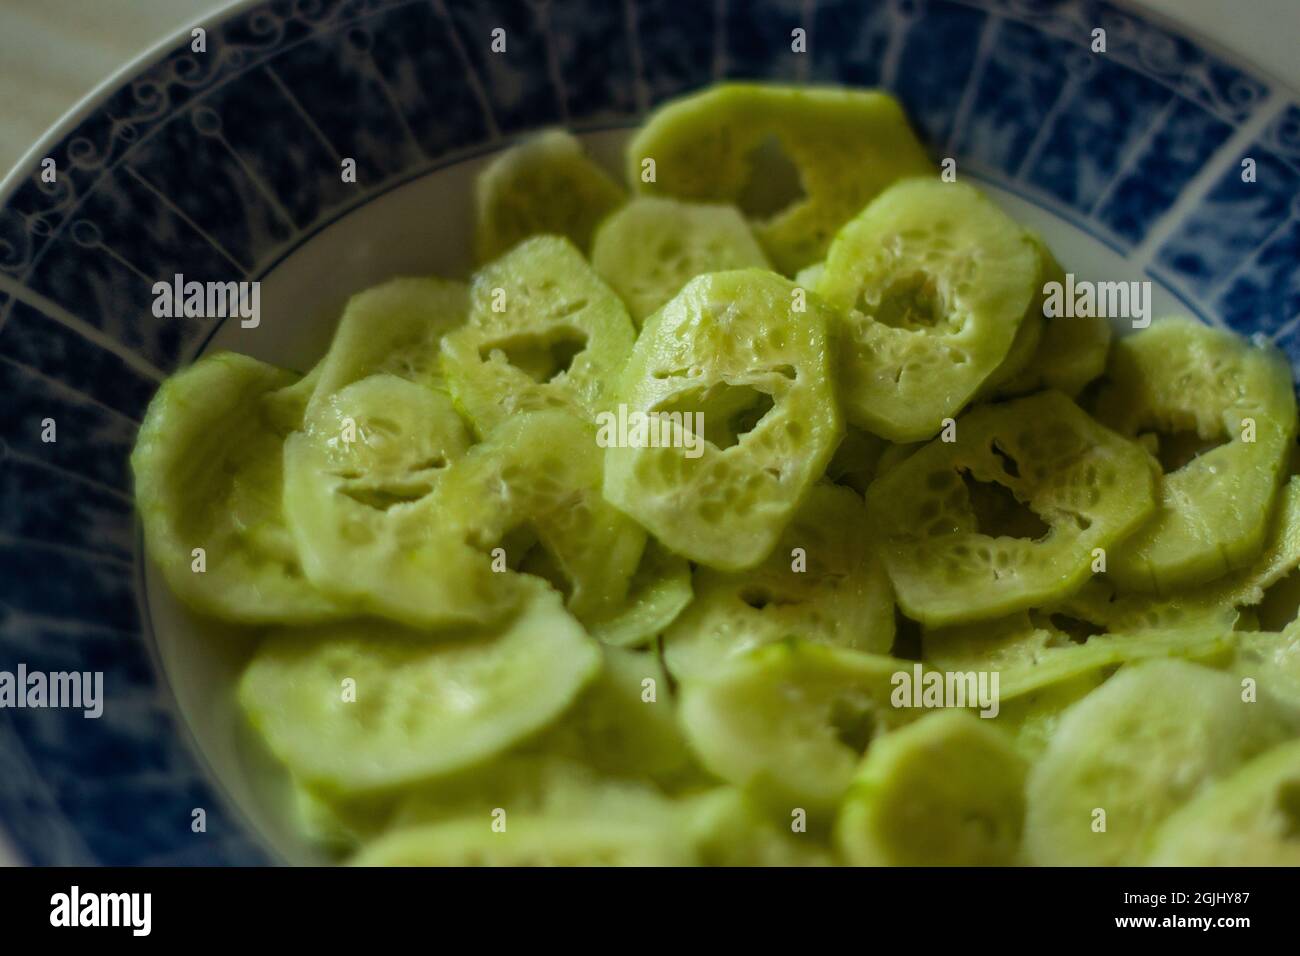 Close of sliced cucumbers on a plate Unusual cucumbers of funny shape looking like faces close view Stock Photo